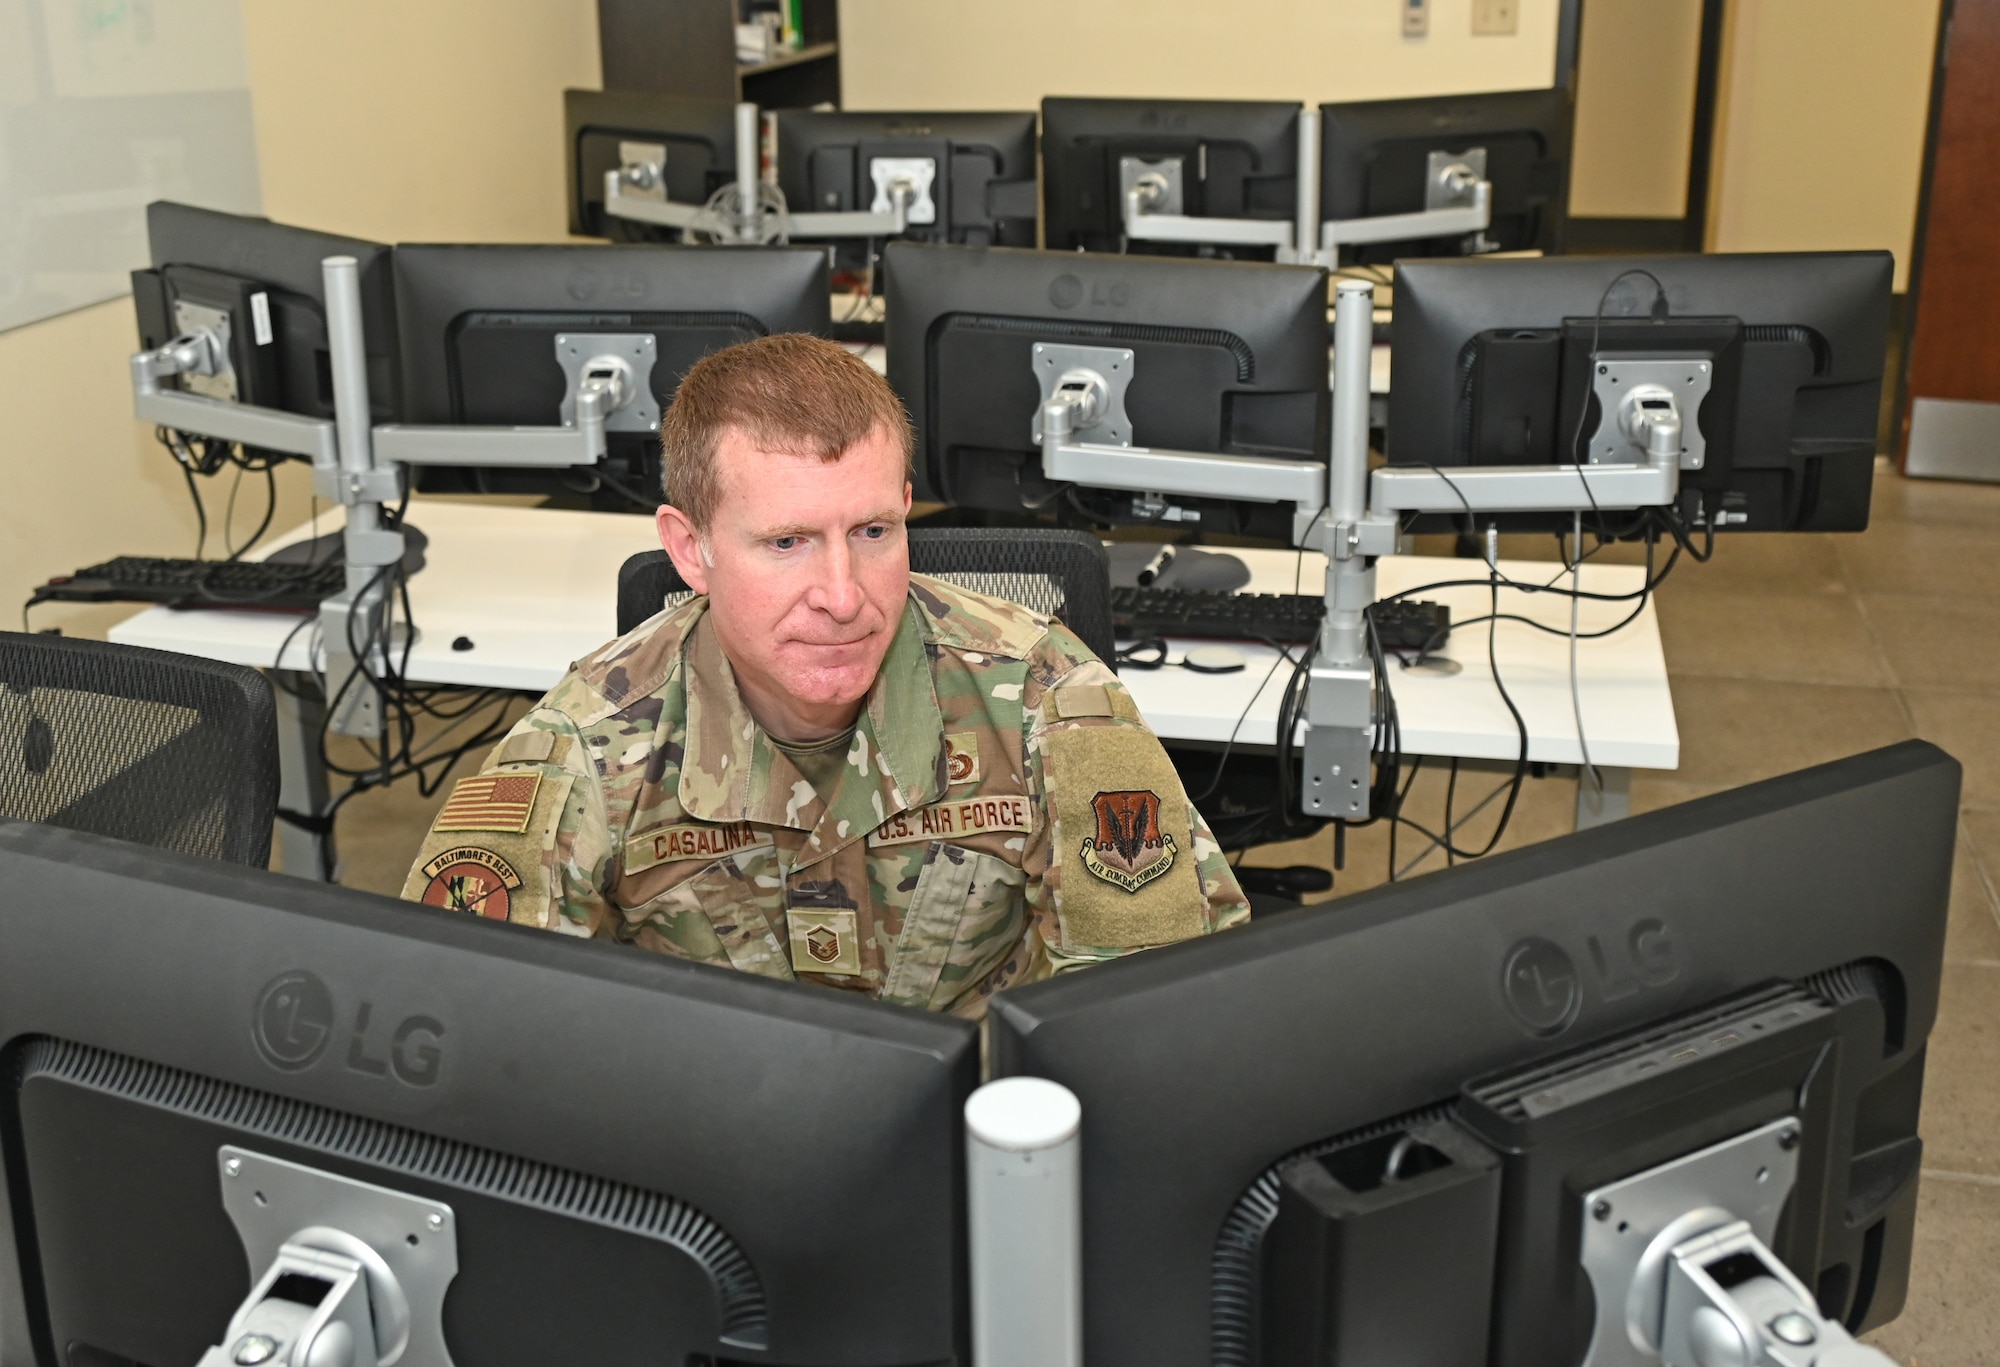 Maryland Air National Guard Master Sgt. Benny Casalina, a network intelligence analyst assigned to the 135th Intelligence Squadron, Maryland Air National Guard, works at a computer terminal at Martin State Air National Guard Base, Middle River, Md., October 27, 2023.